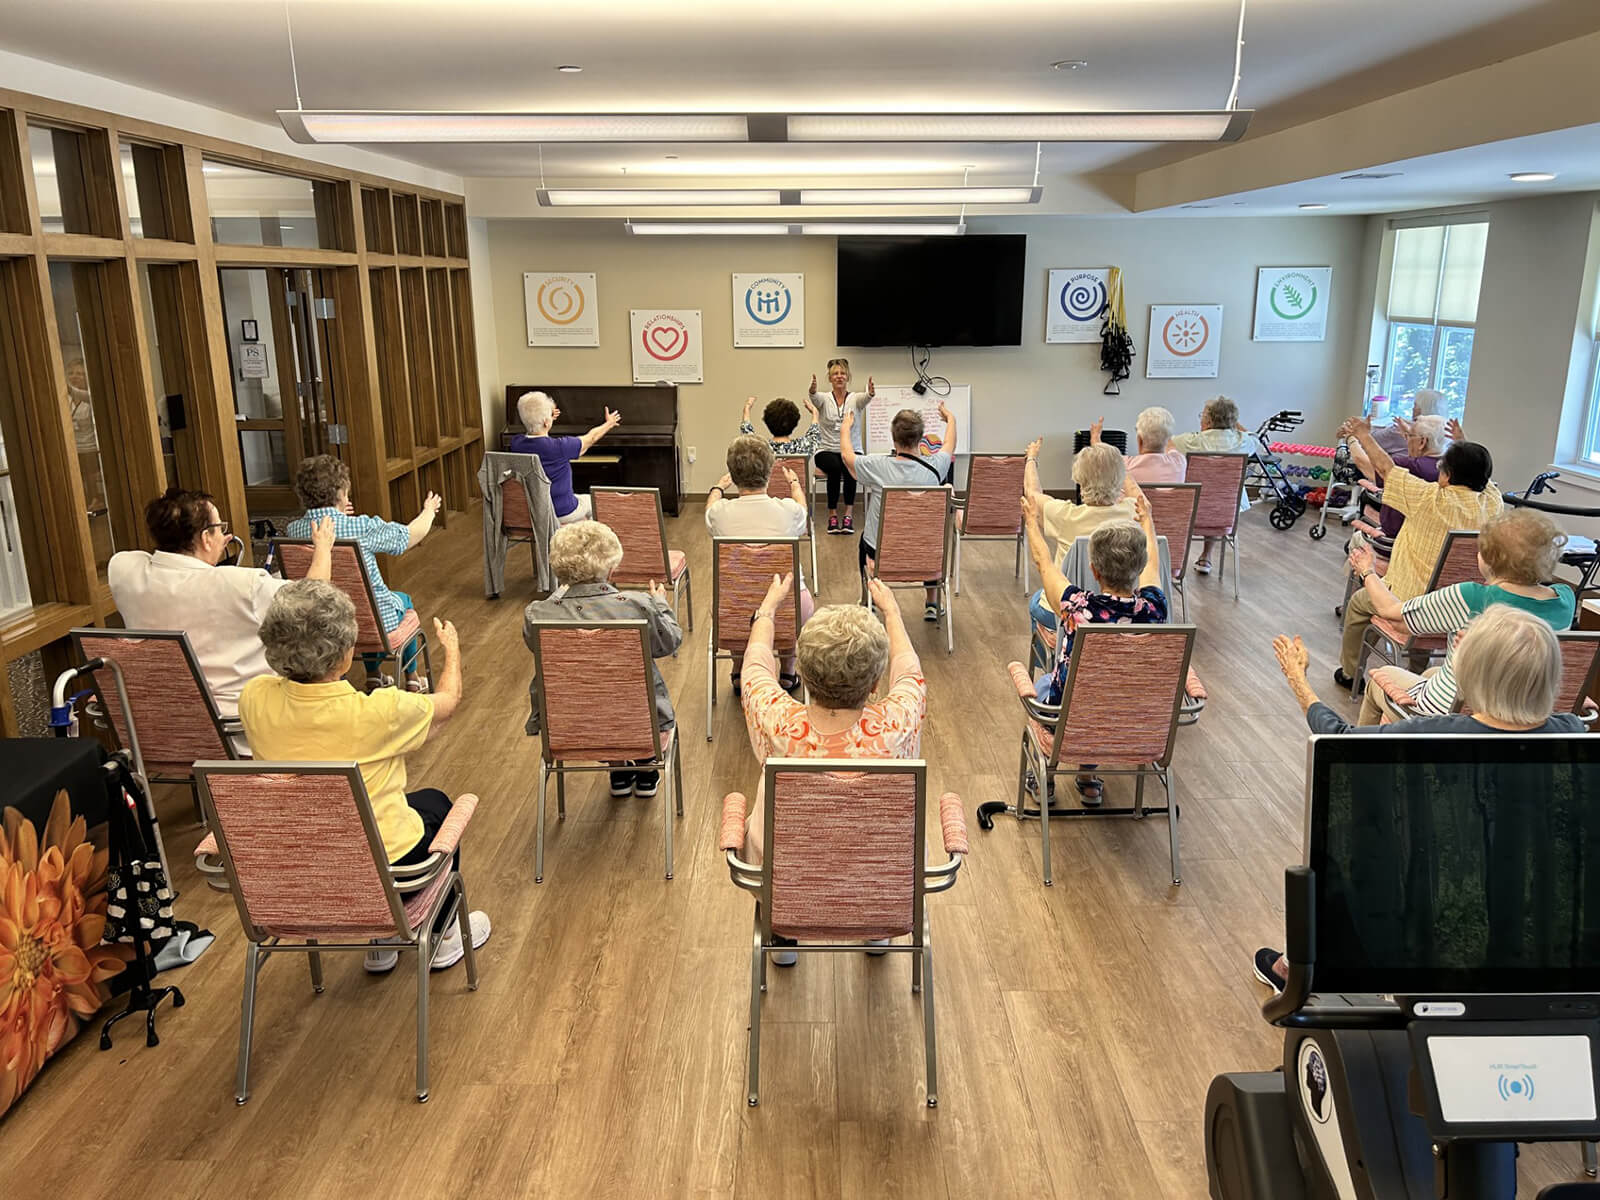 Residents at The Waters of Wexford participating in a seated fitness class, promoting active aging and wellness.